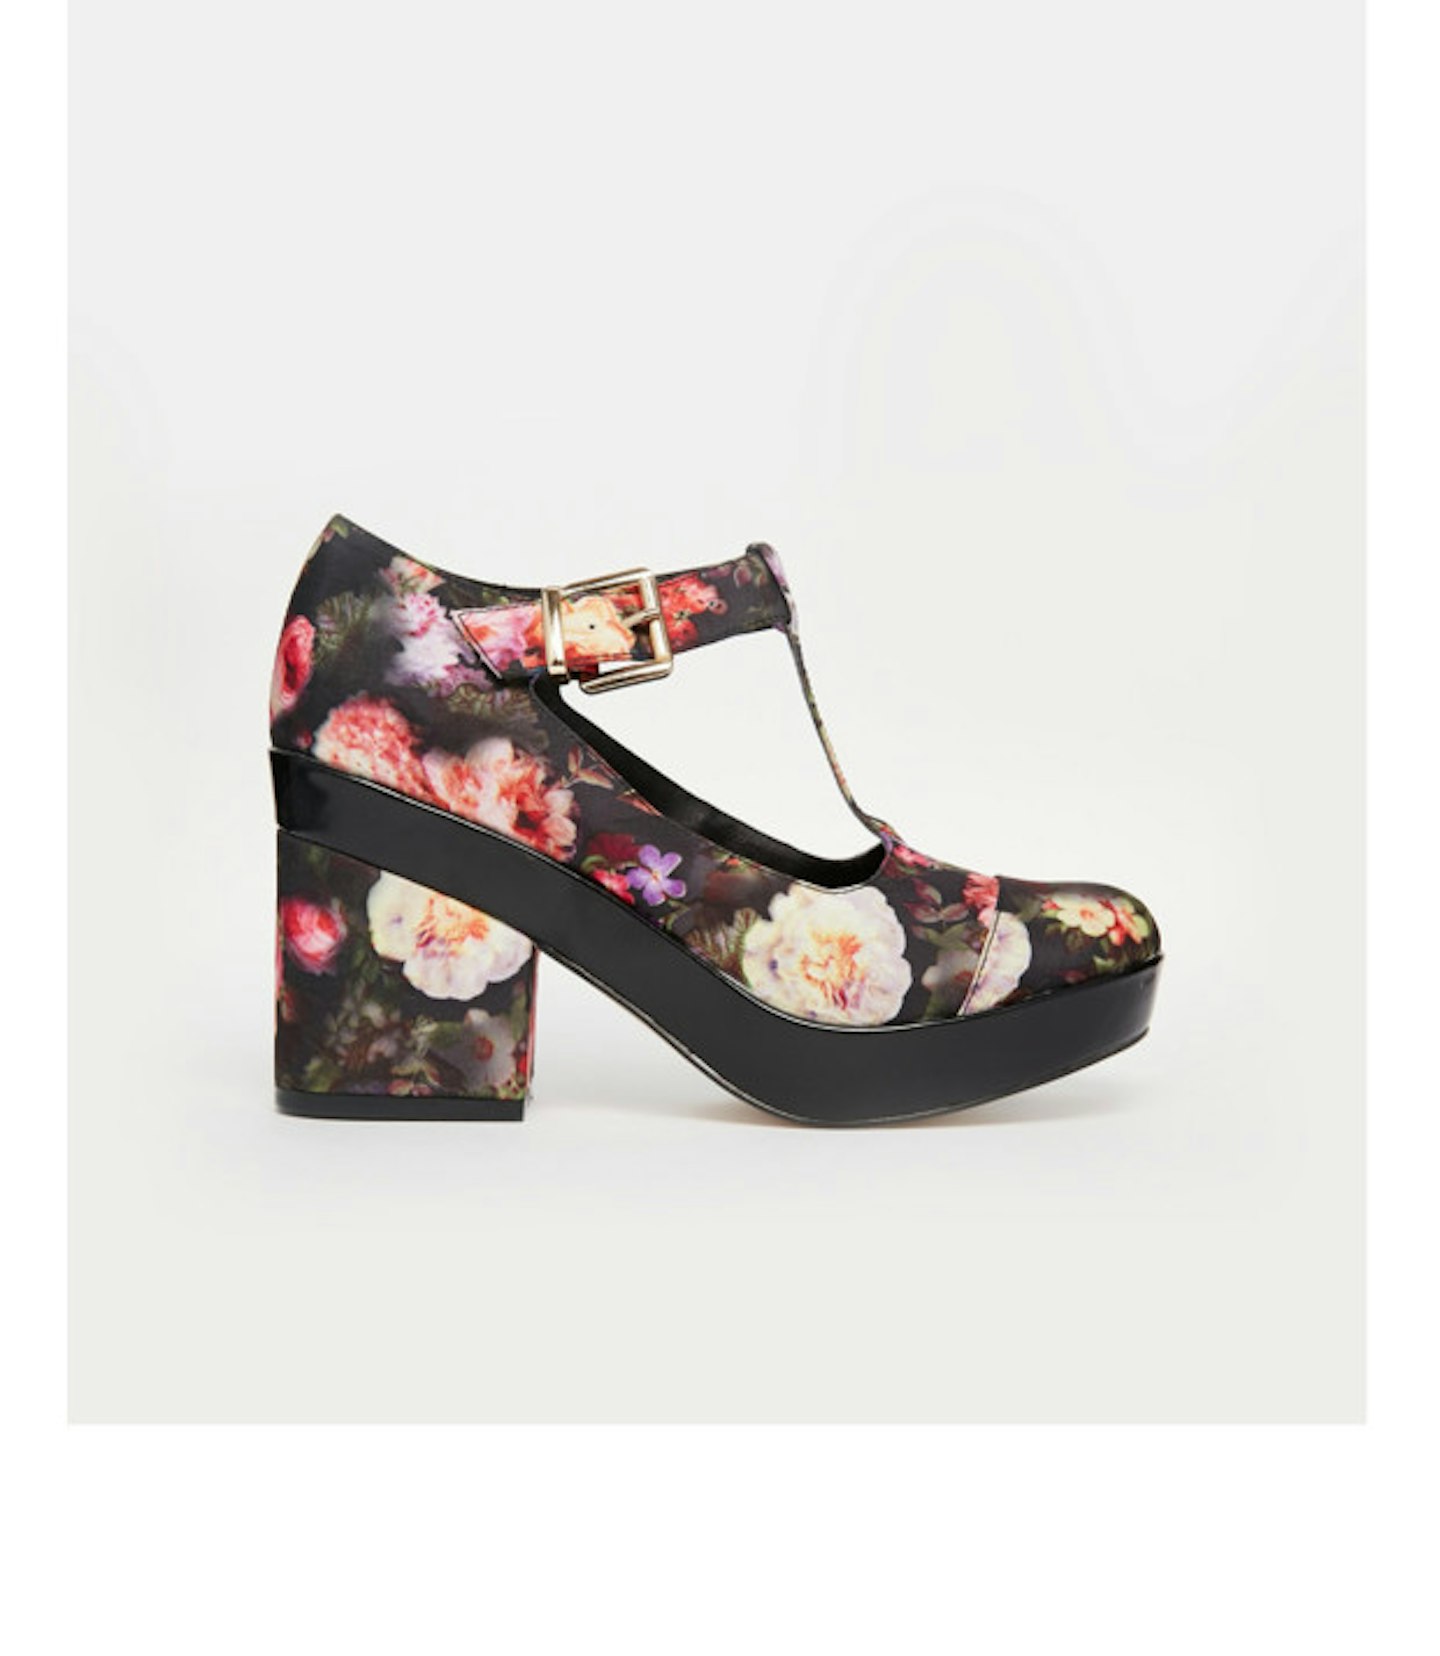 Floral Mary-Janes